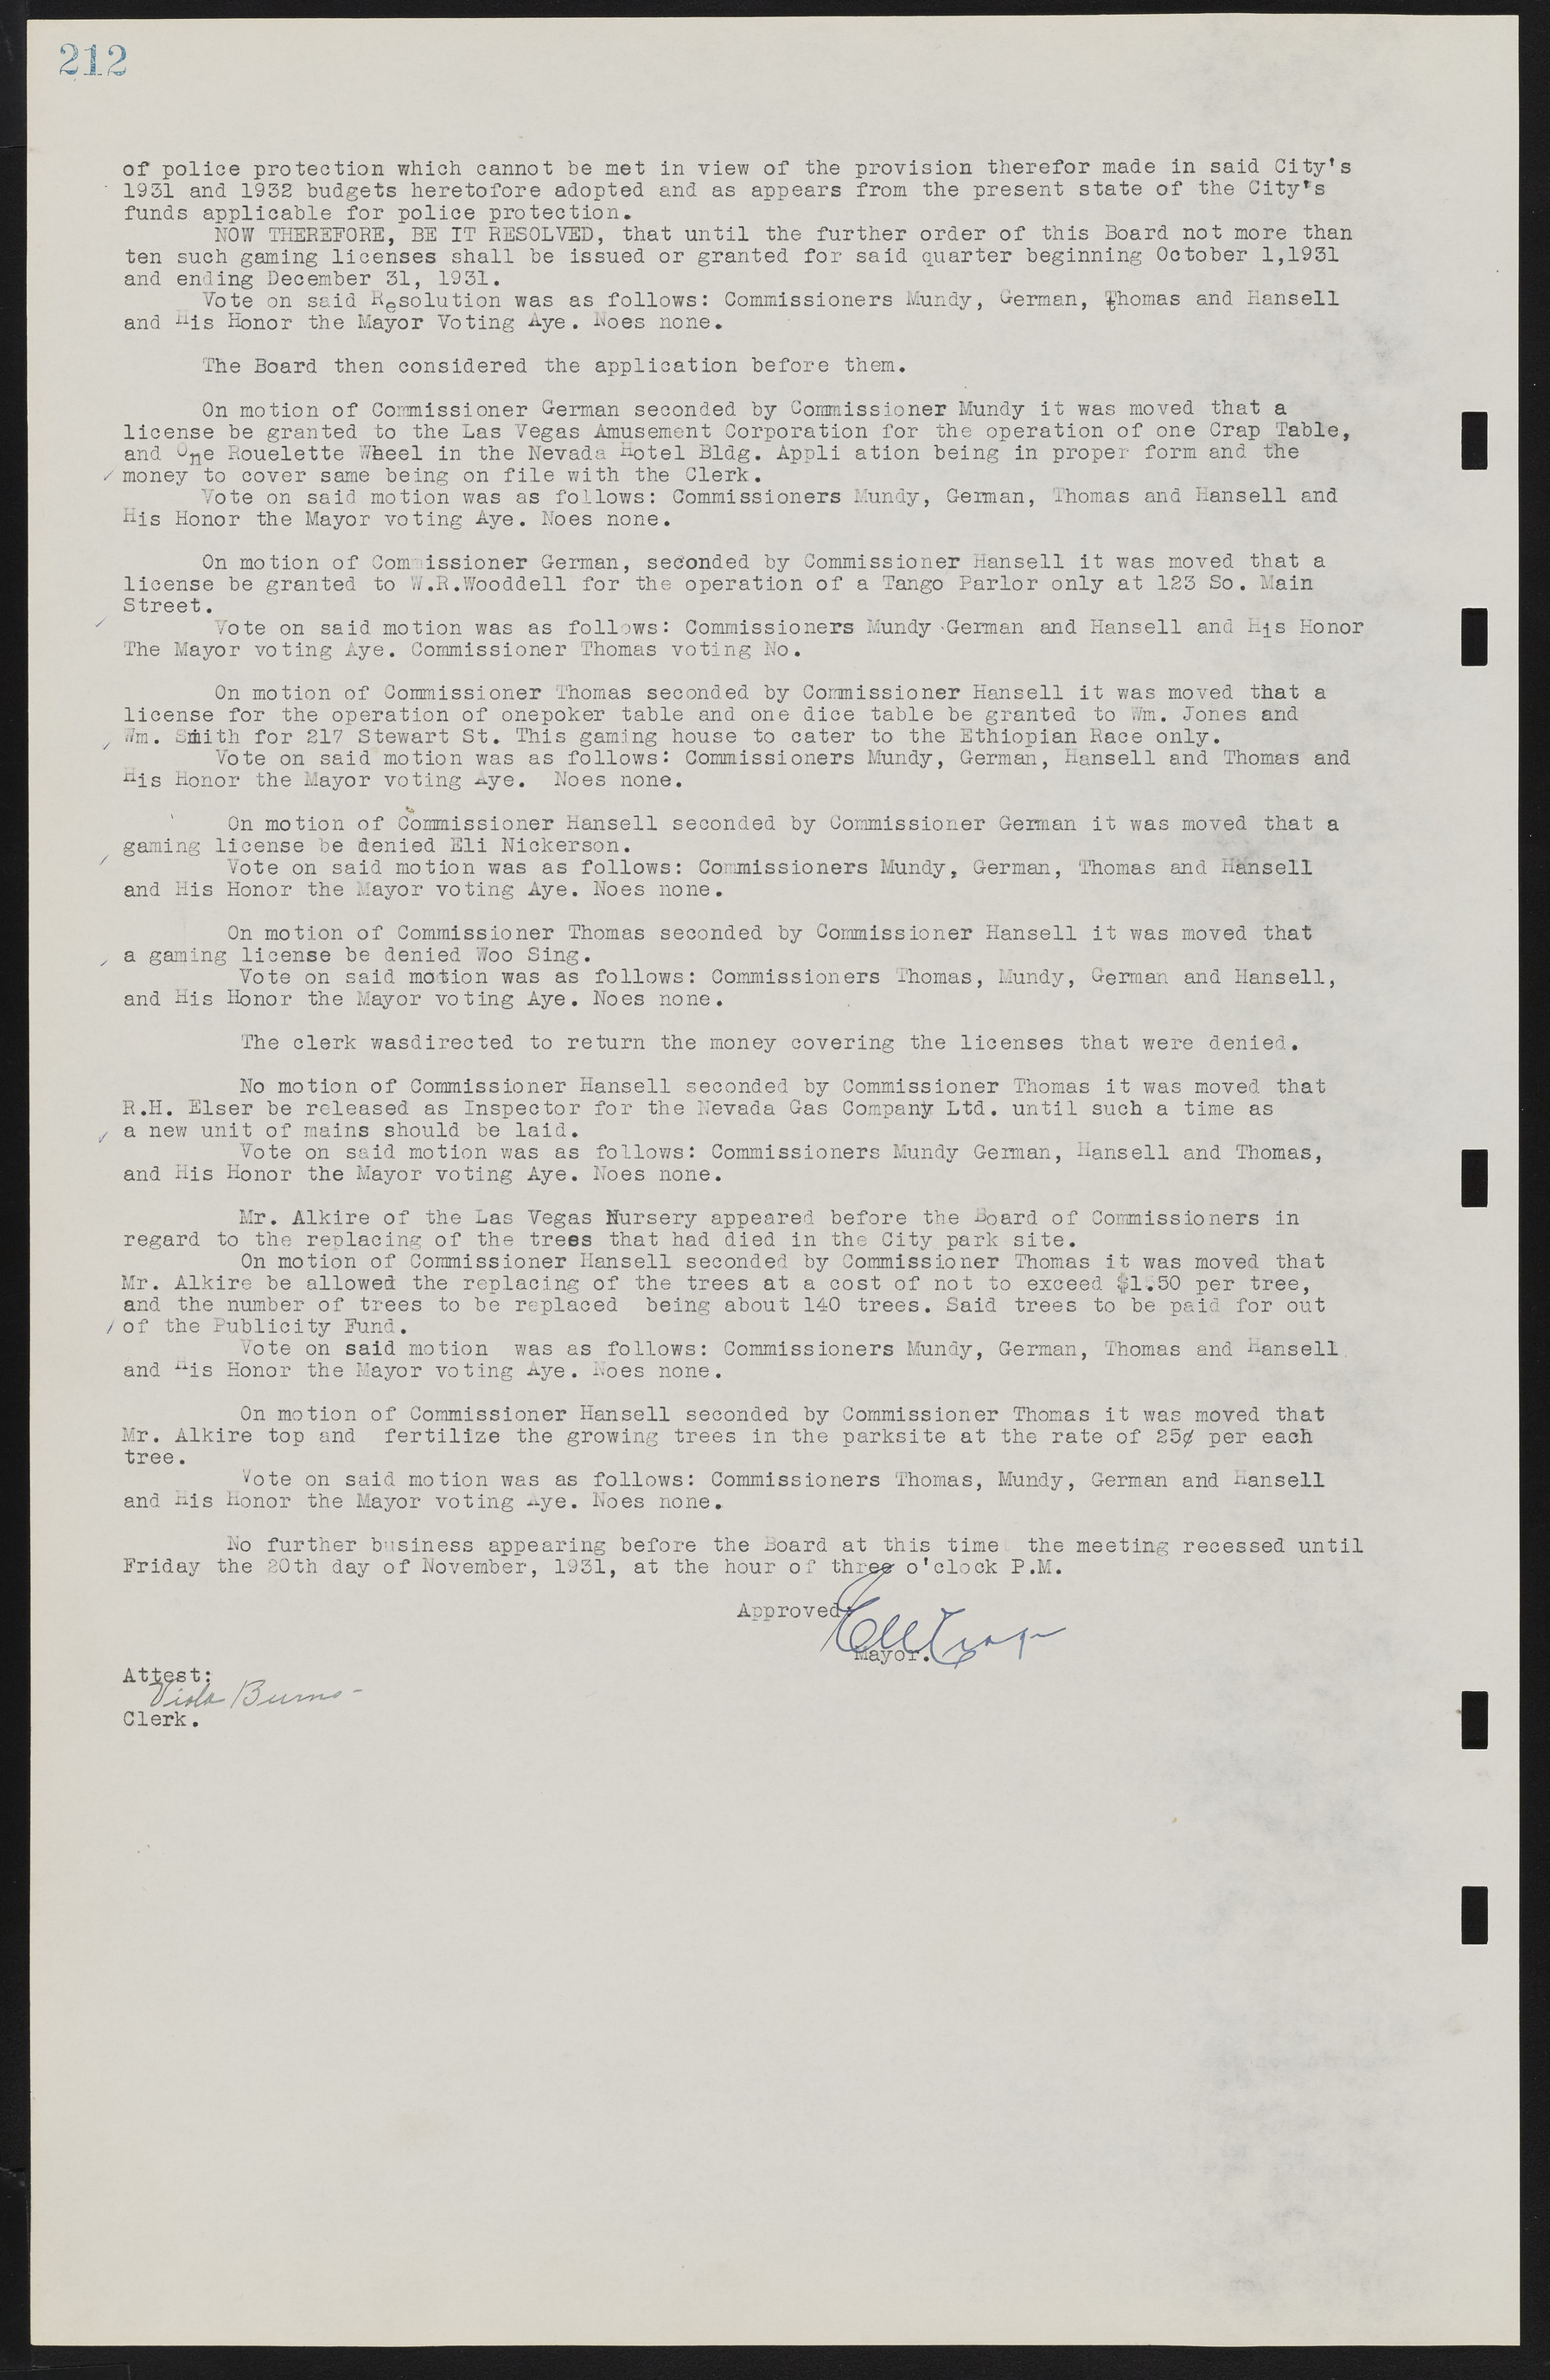 Las Vegas City Commission Minutes, May 14, 1929 to February 11, 1937, lvc000003-218